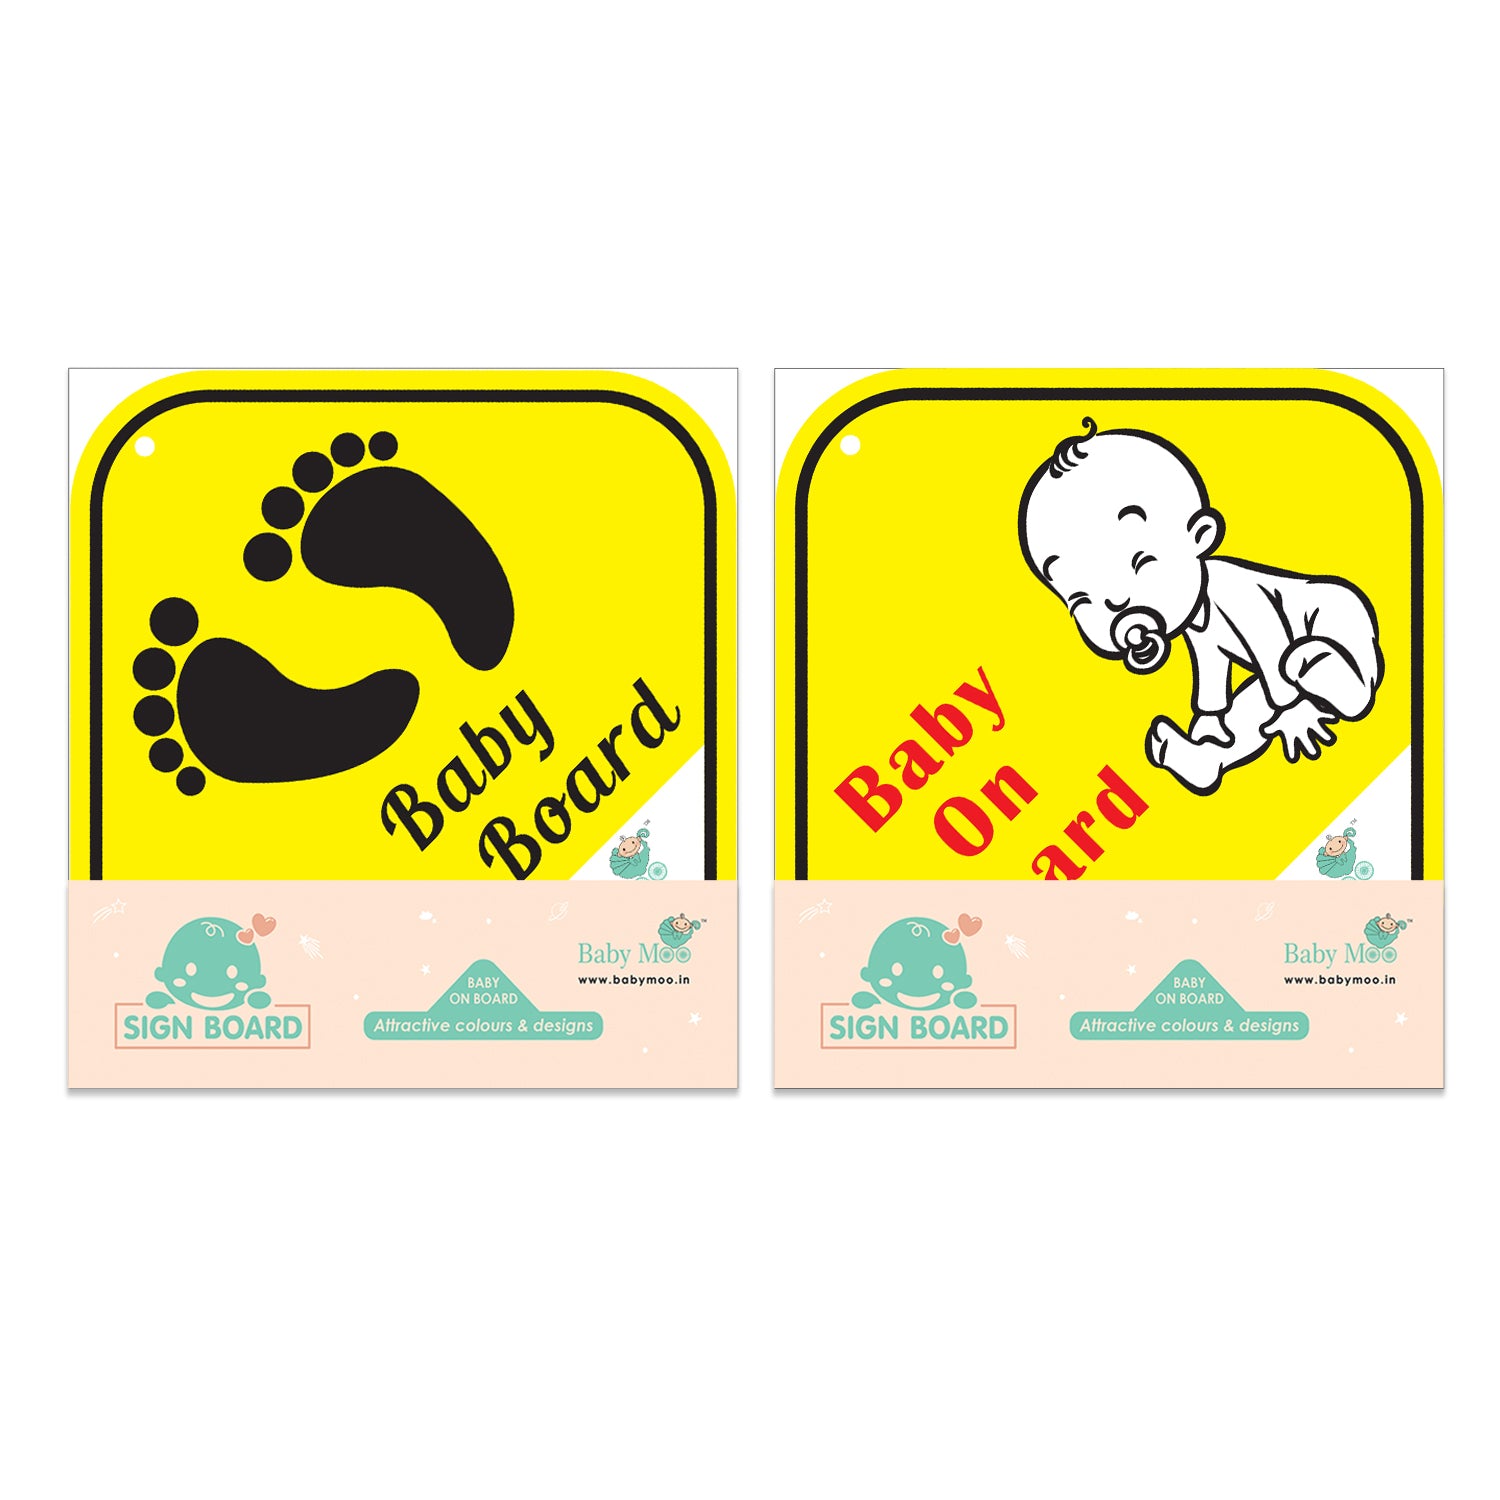 Baby Moo Tiny Baby On Board Car Safety Sign With Suction Cup Clip 2 Pack - Yellow